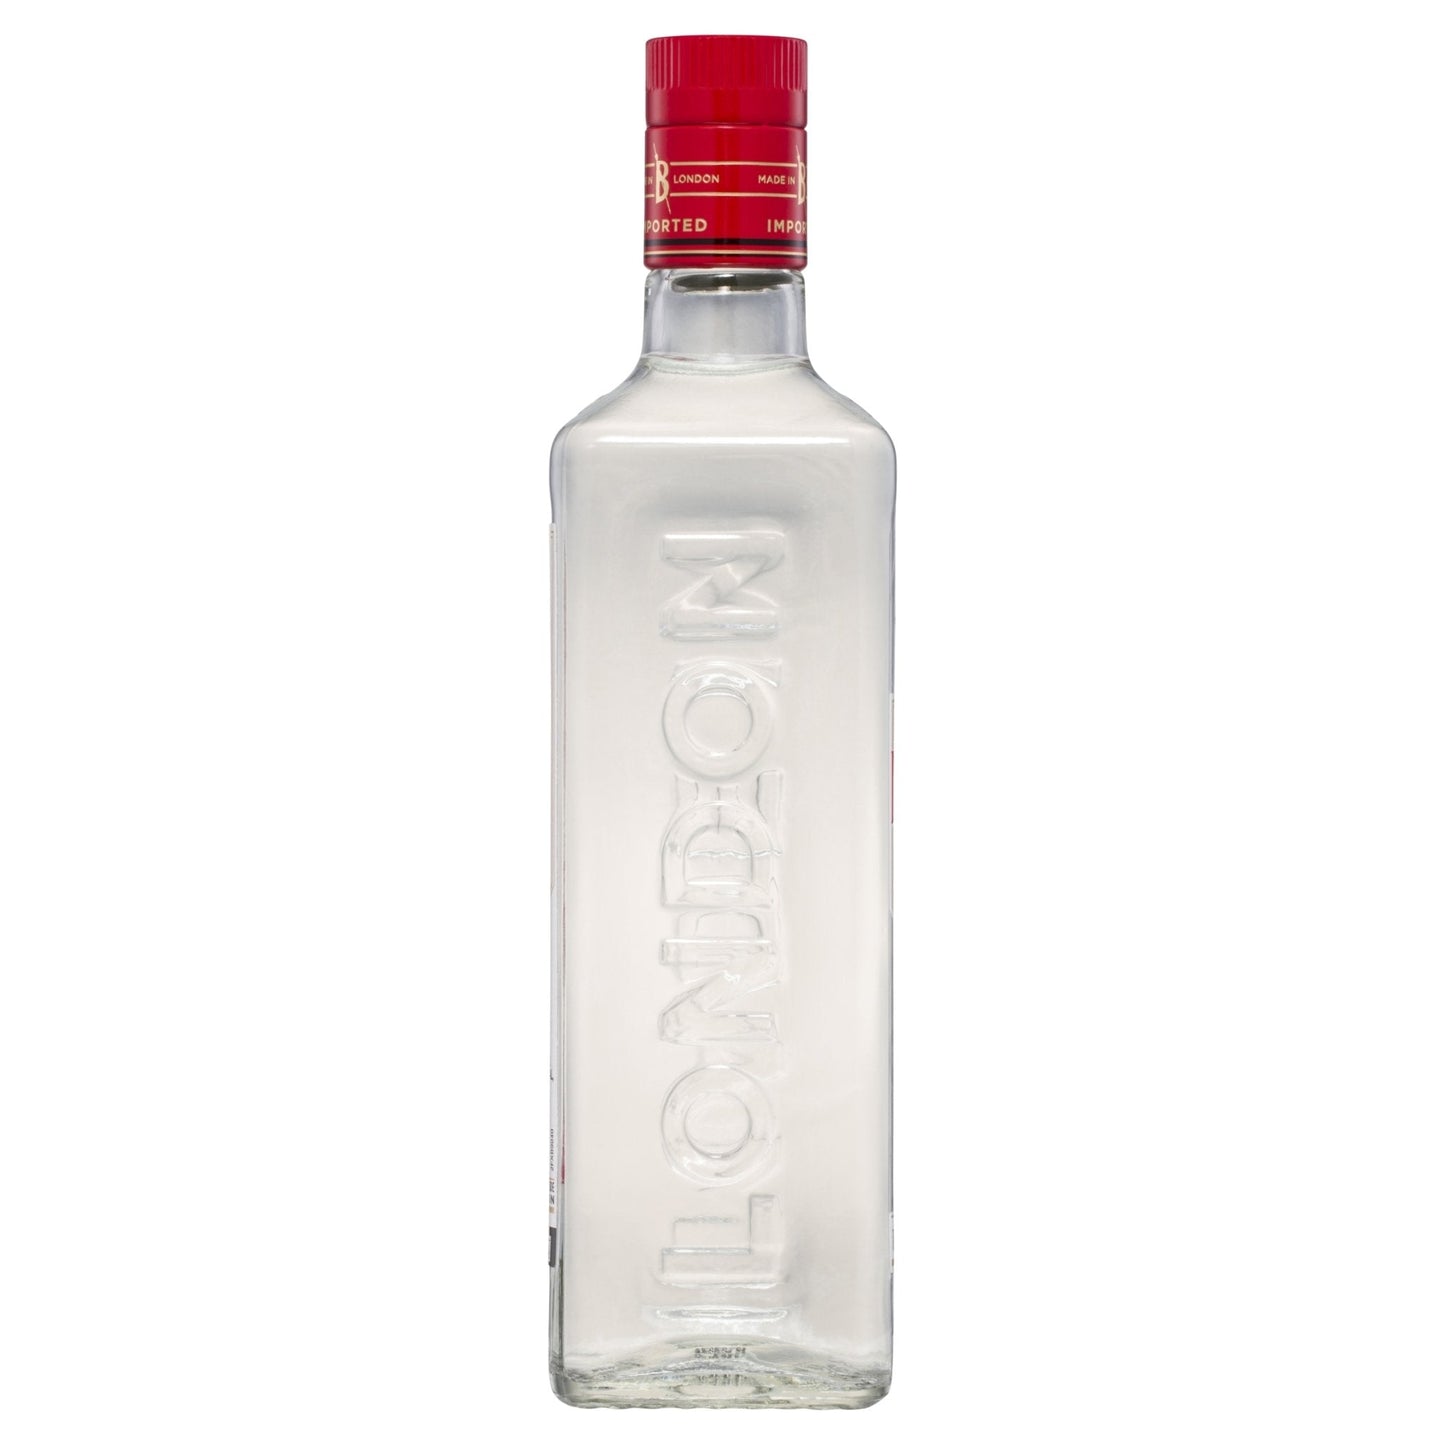 Beefeater Gin England London Dry (700mL) - drinkswithdave